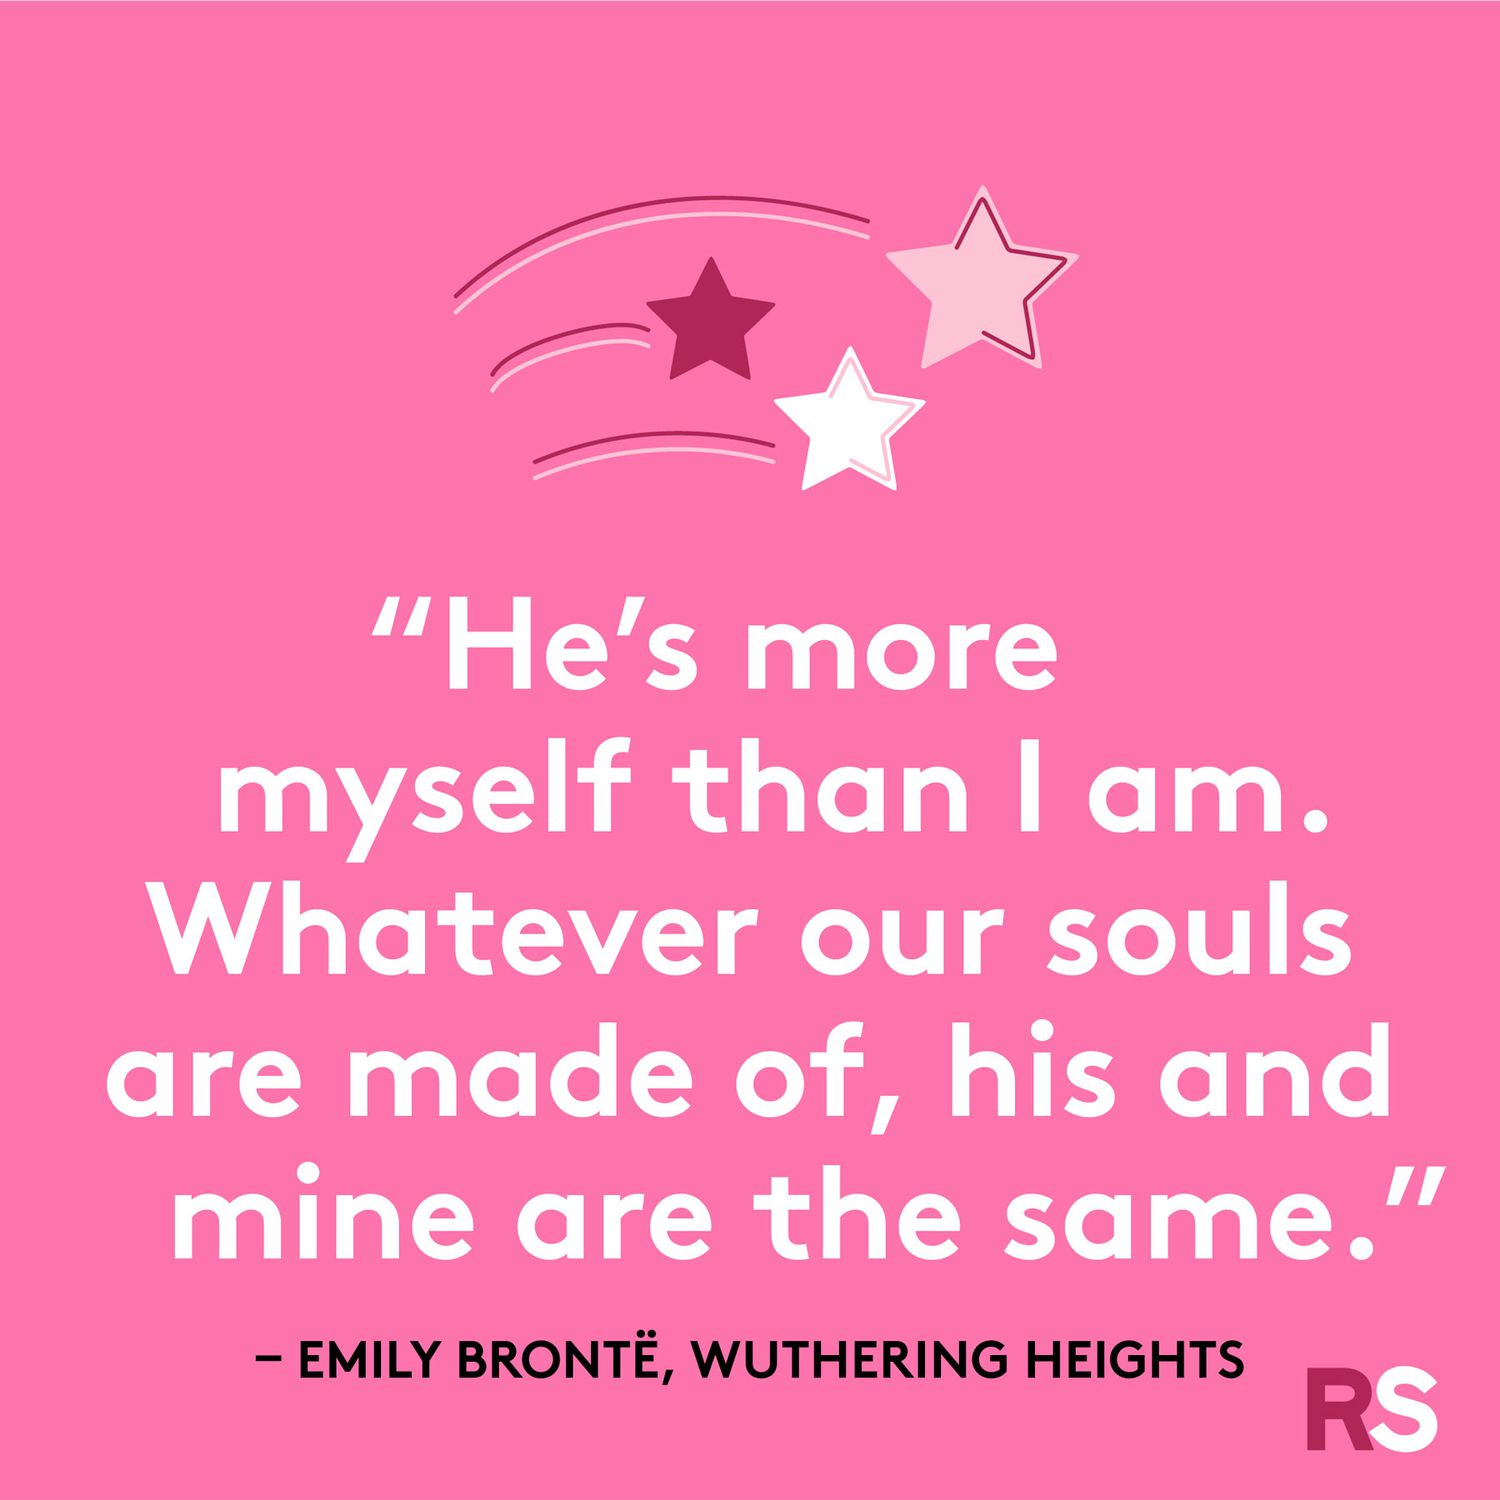 Love quotes, quotes about love - Emily Brontë, Wuthering Heights